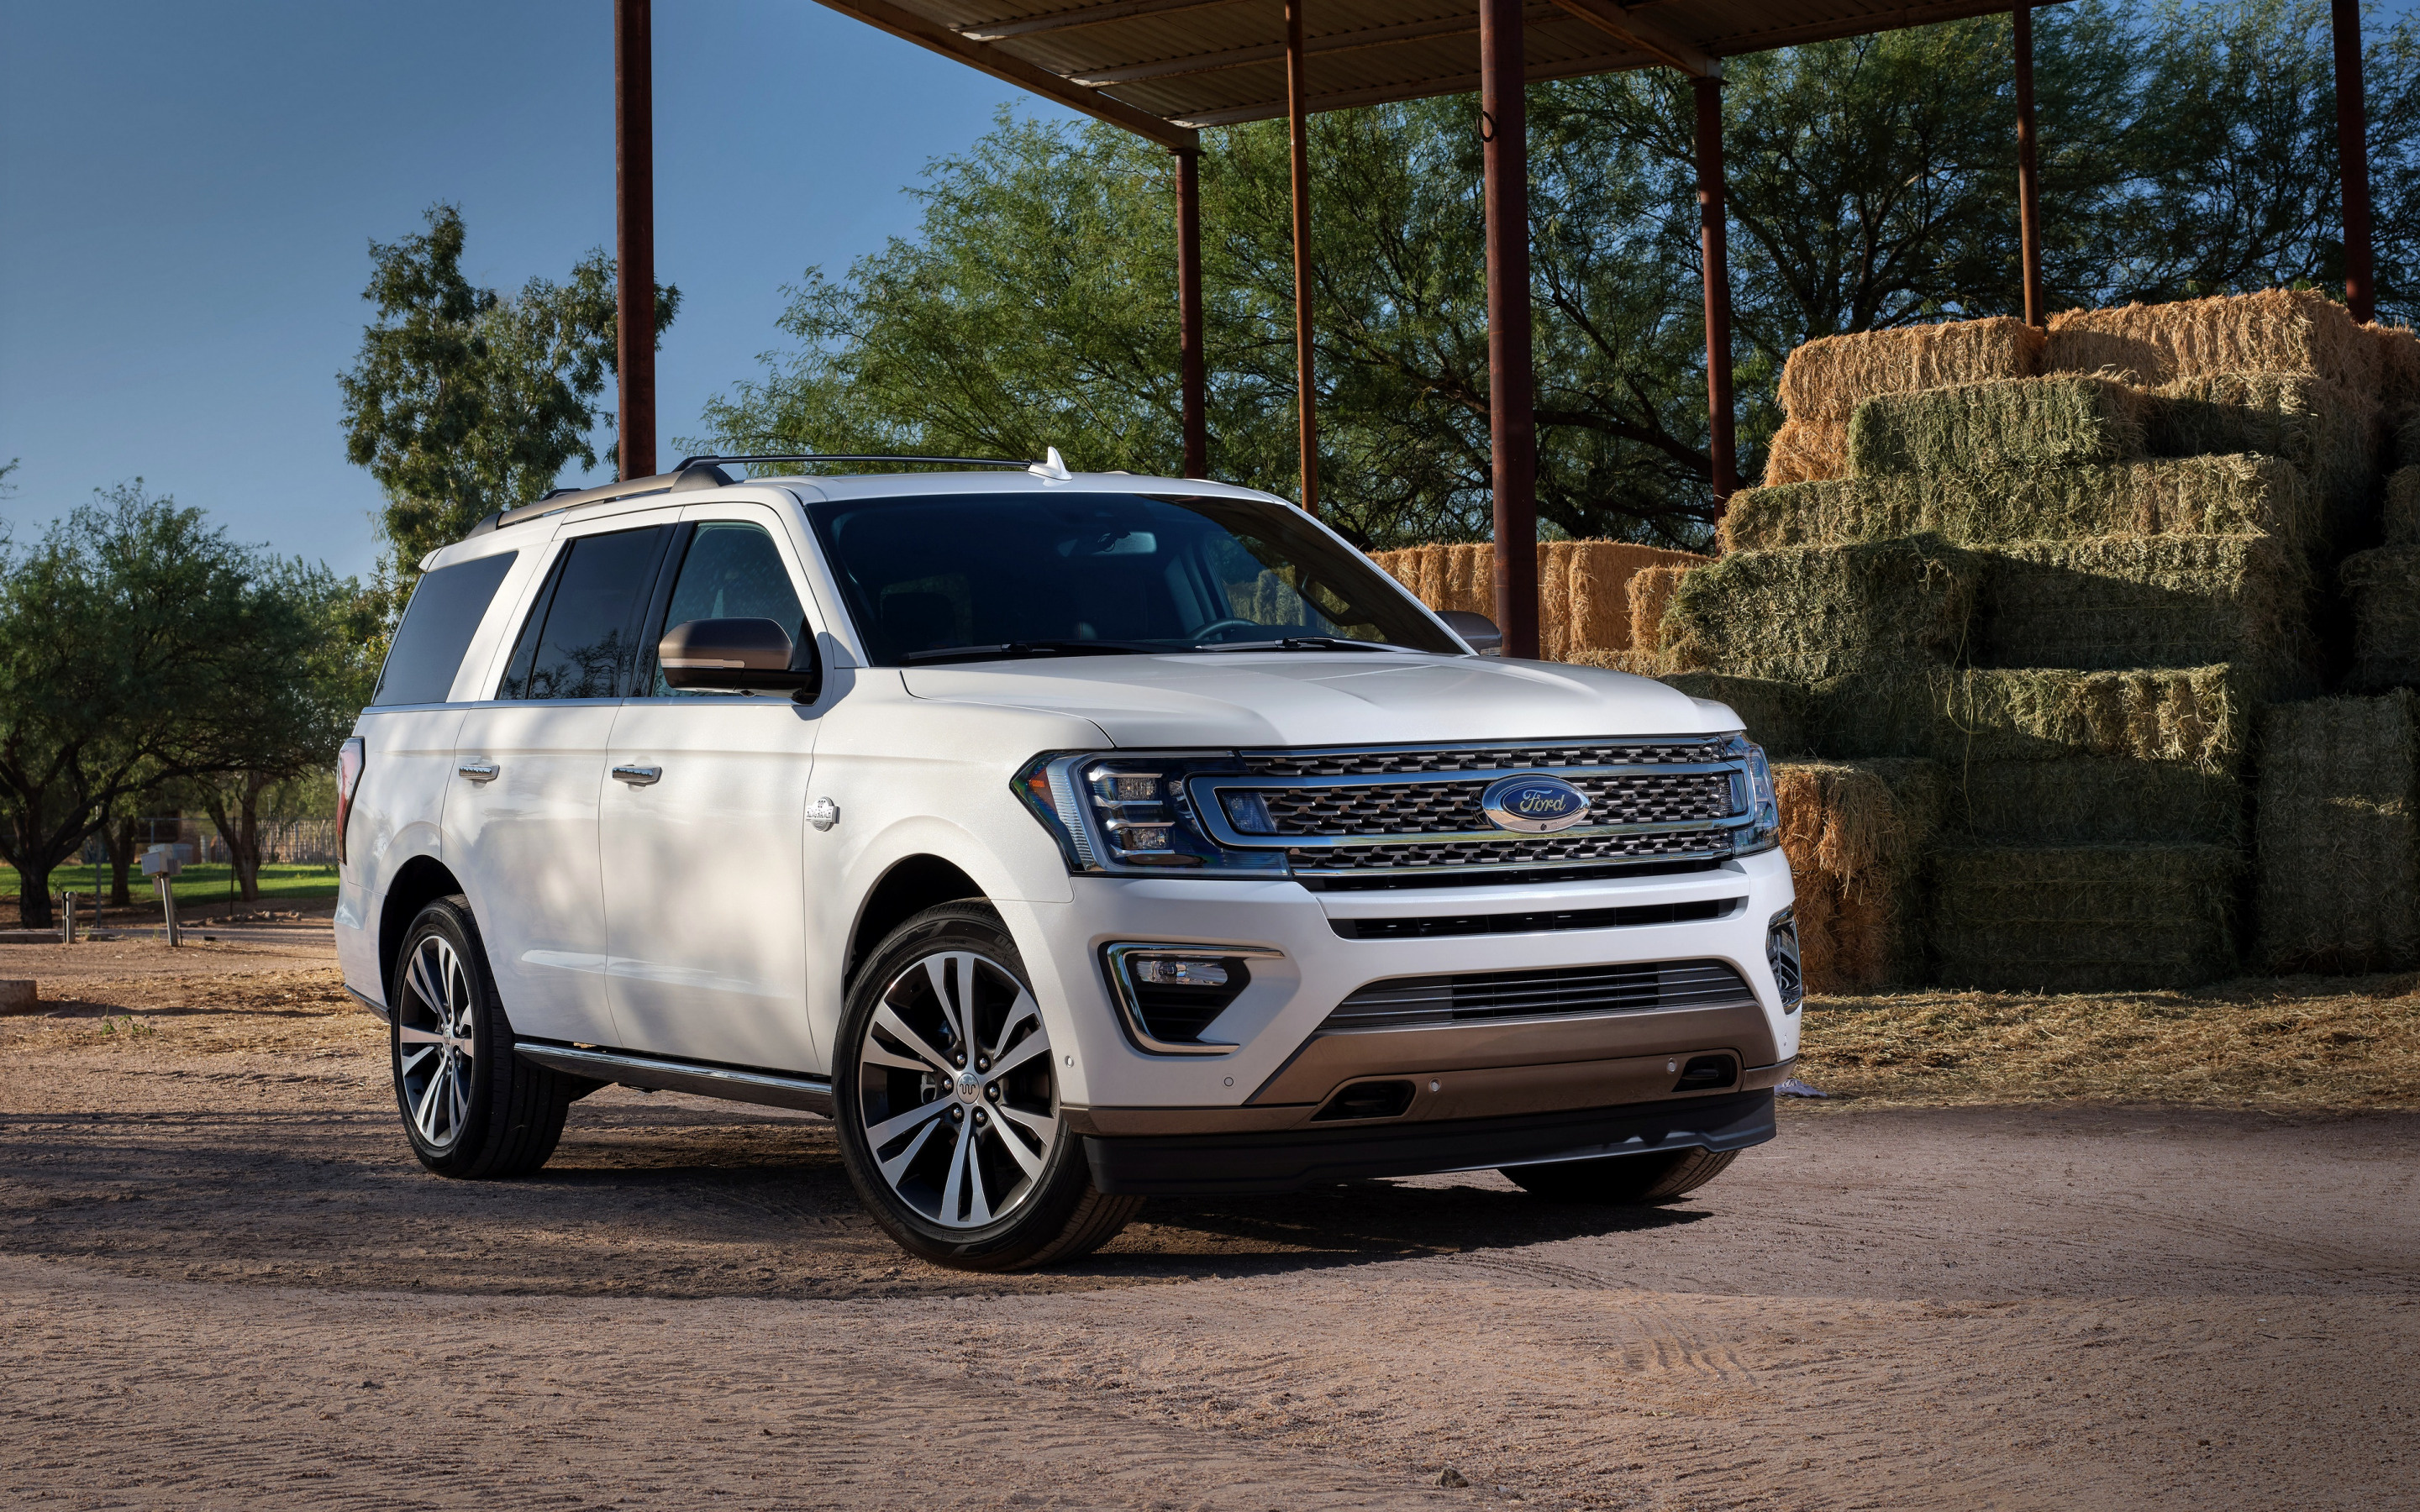 Ford Expedition, 2020 SUV, White luxury, High quality, 2880x1800 HD Desktop